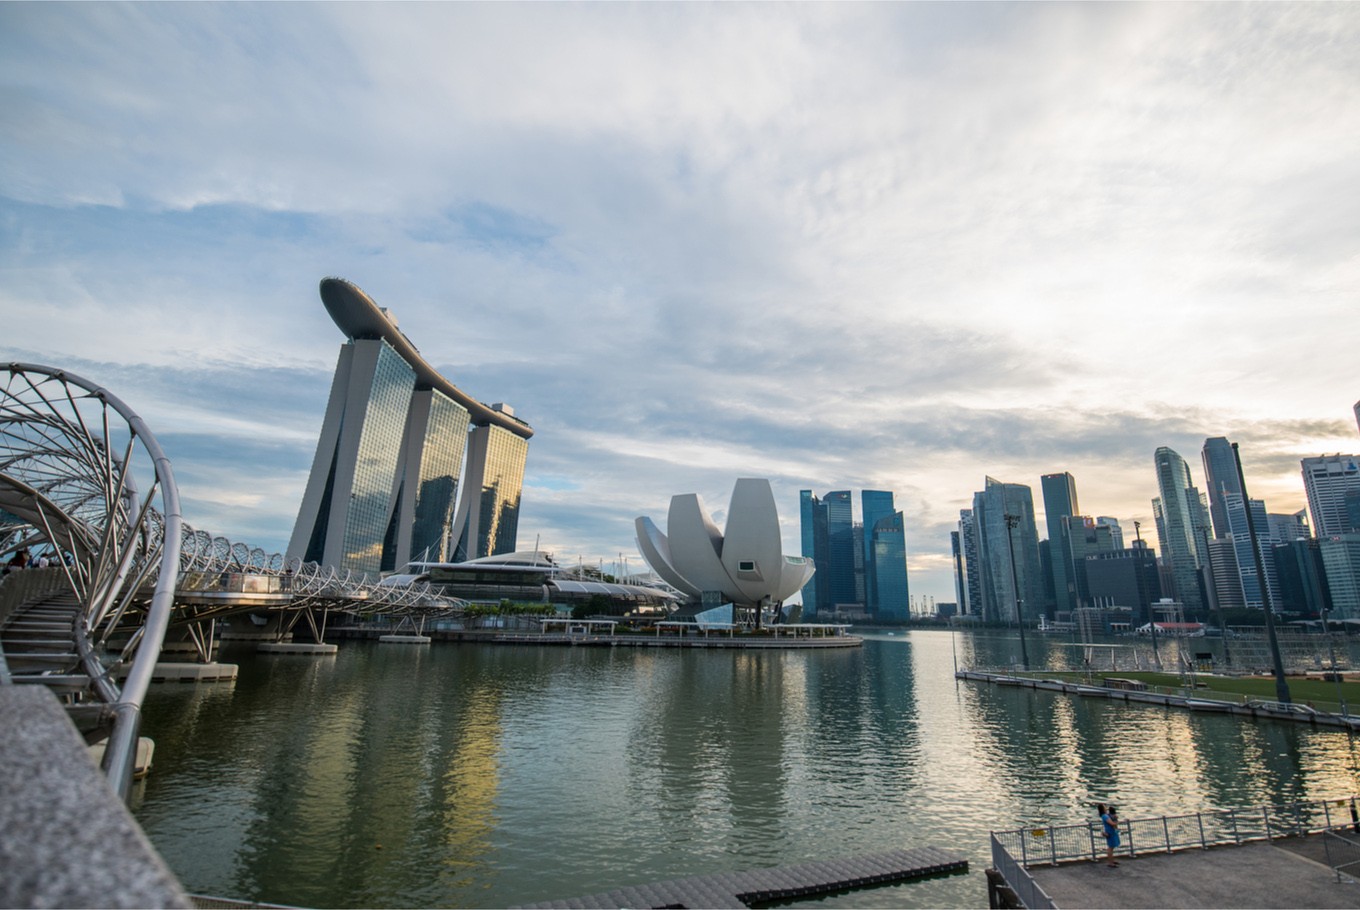 Singapore's landscape and city infrastructure. Image: Shutterstock/beersonic